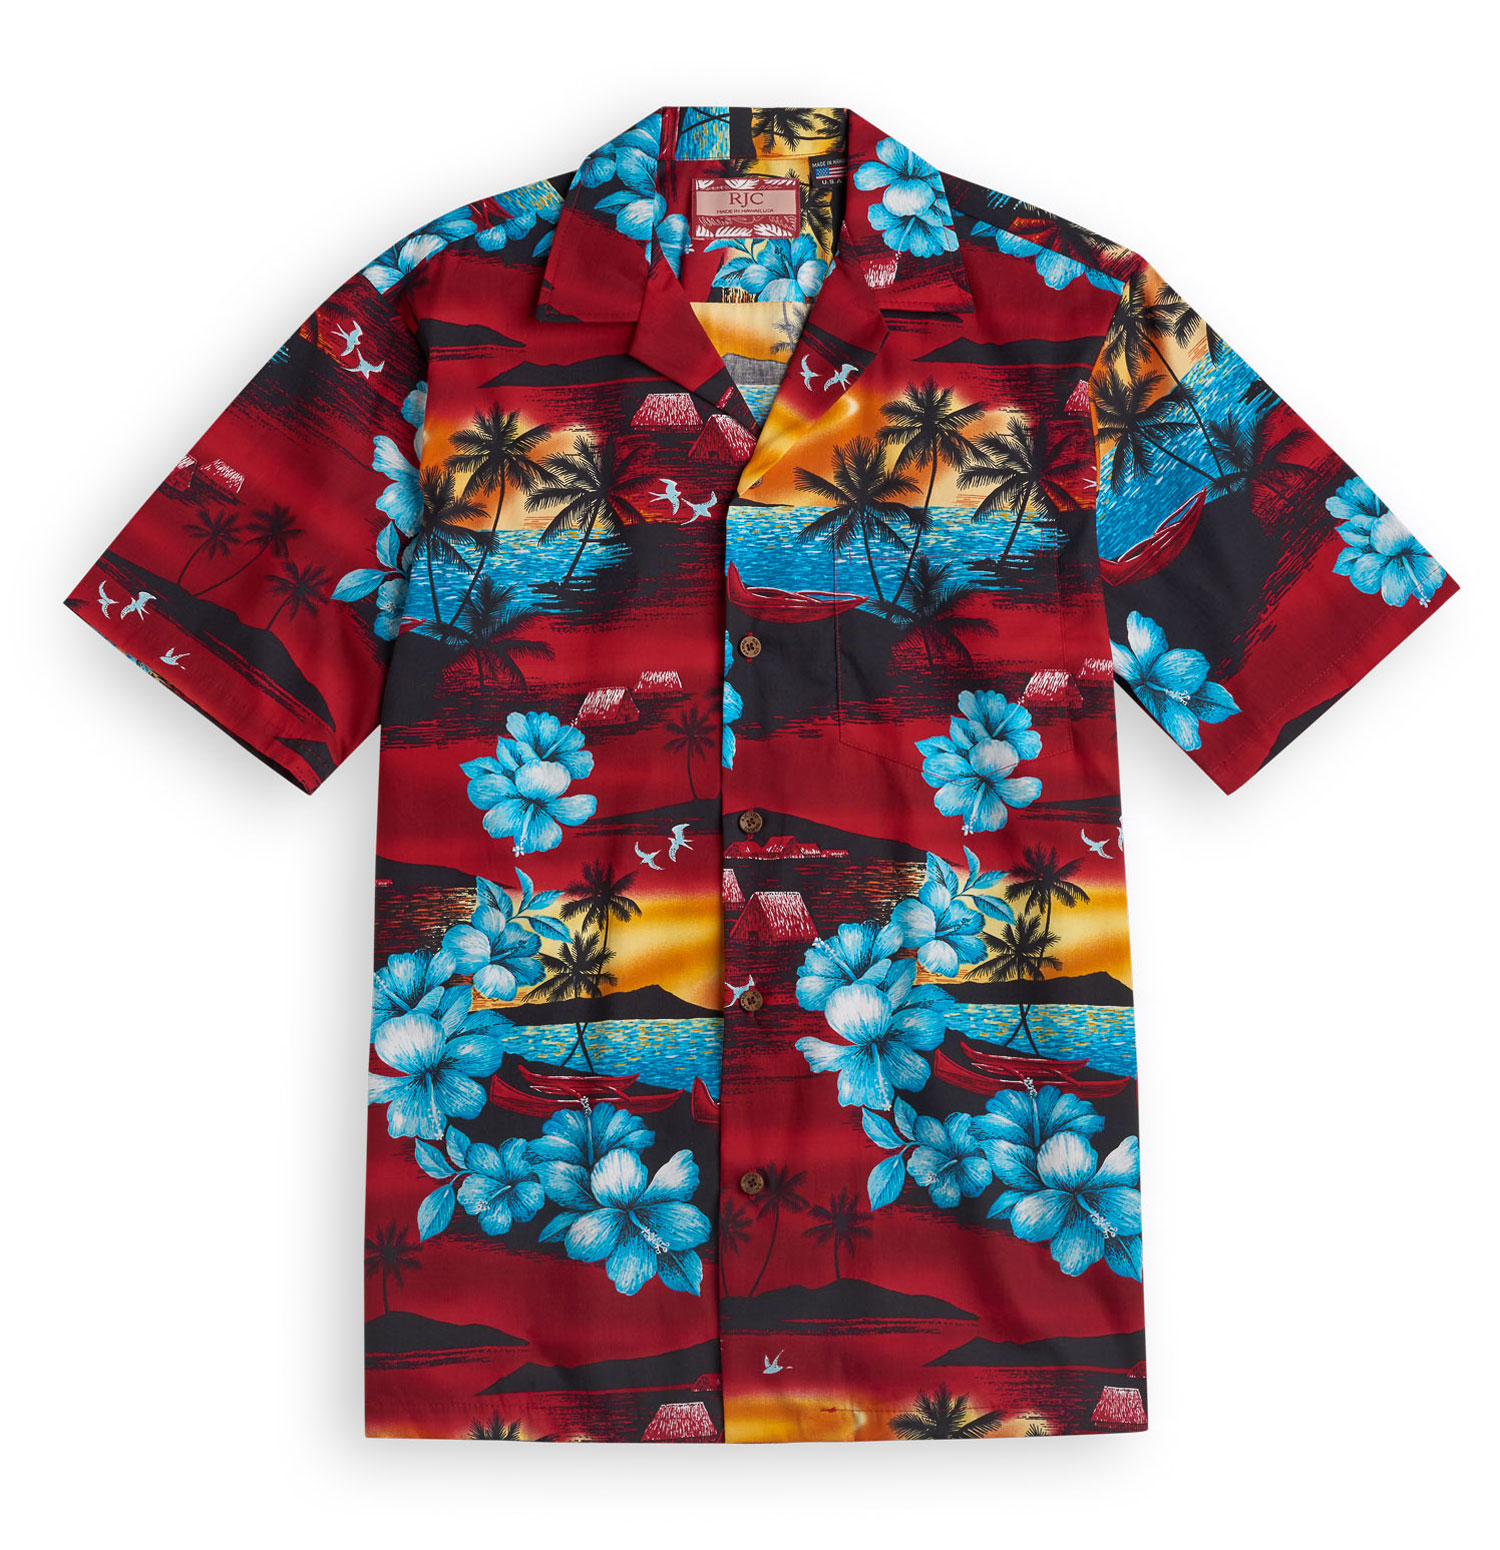 Chicago Bulls Nba Red Pattern Tropical Vibe Style Hawaiian Shirt For Men  And Women - Freedomdesign